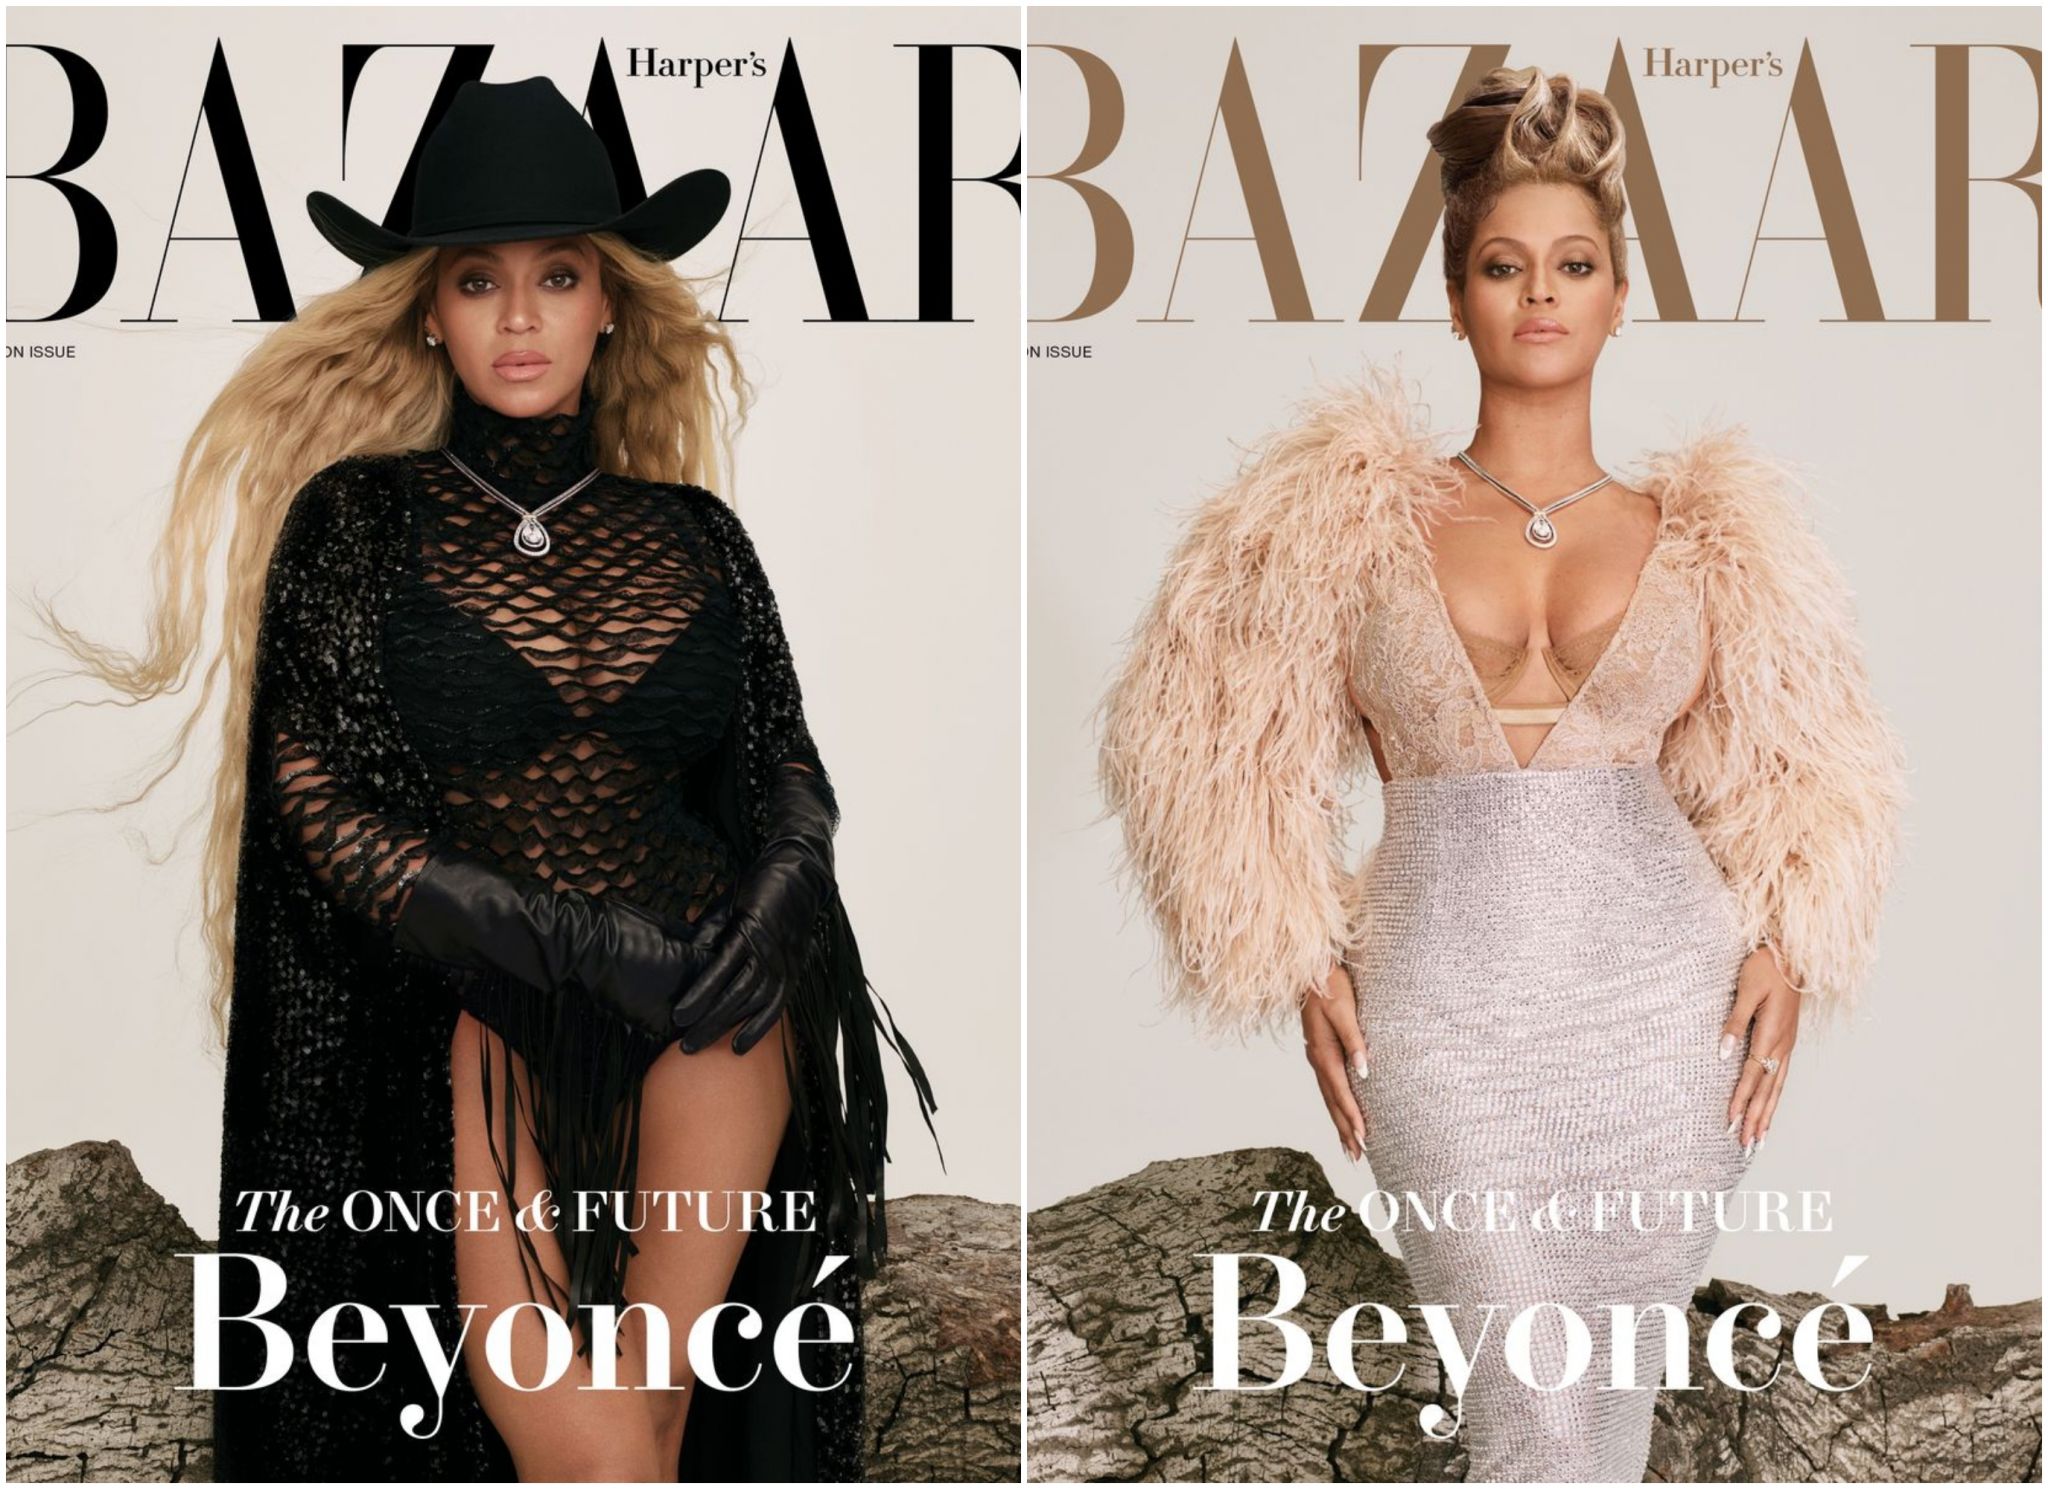 Beyoncé celebrates turning 40 with Harper's Bazaar cover